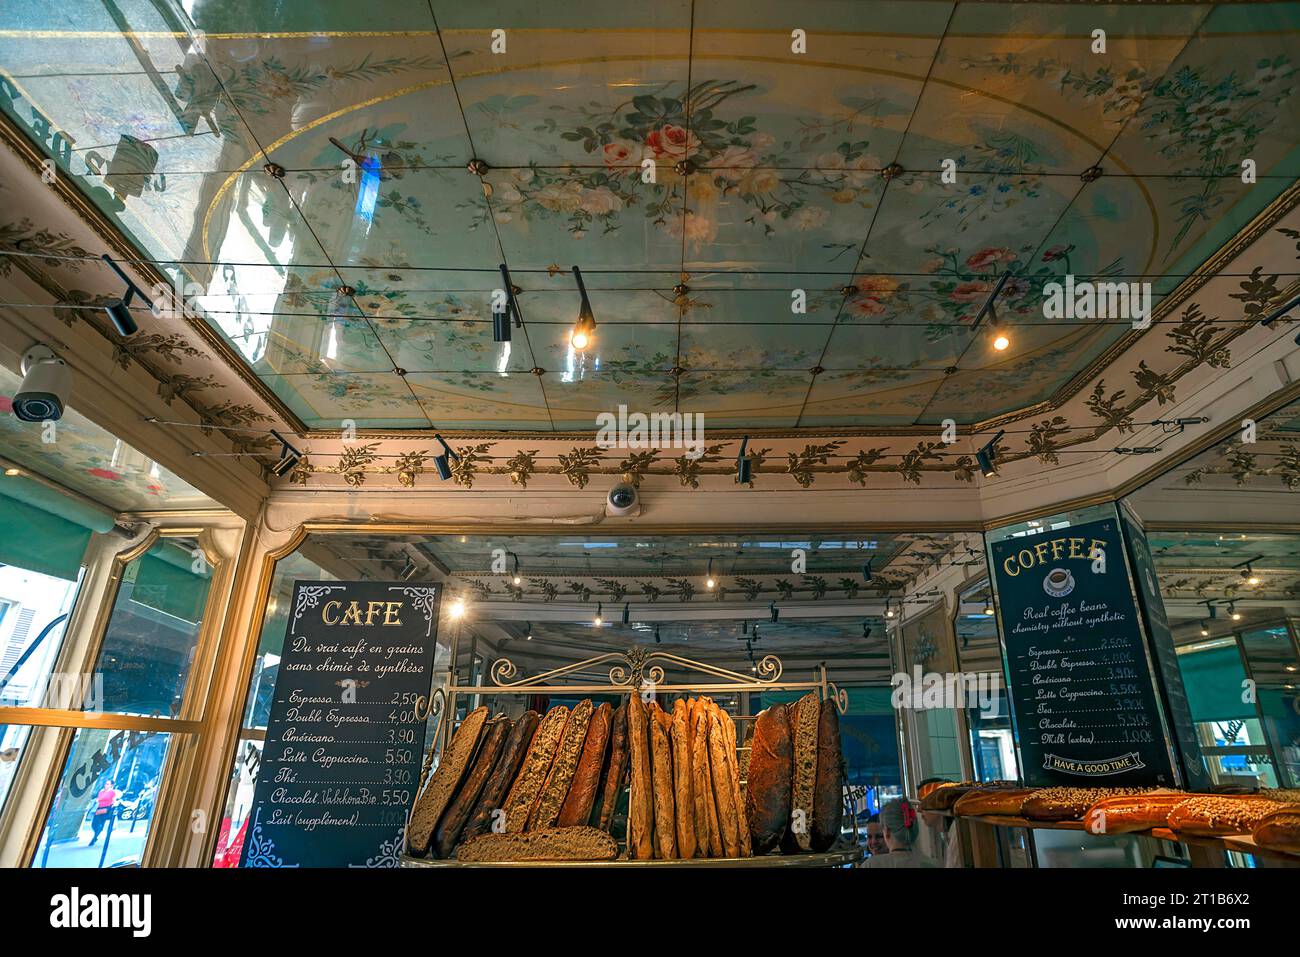 Historic bakery from 1875 with painted ceiling, Boulangerie La traditionnel, 34 Rue Yves Toudic, Paris, France Stock Photo